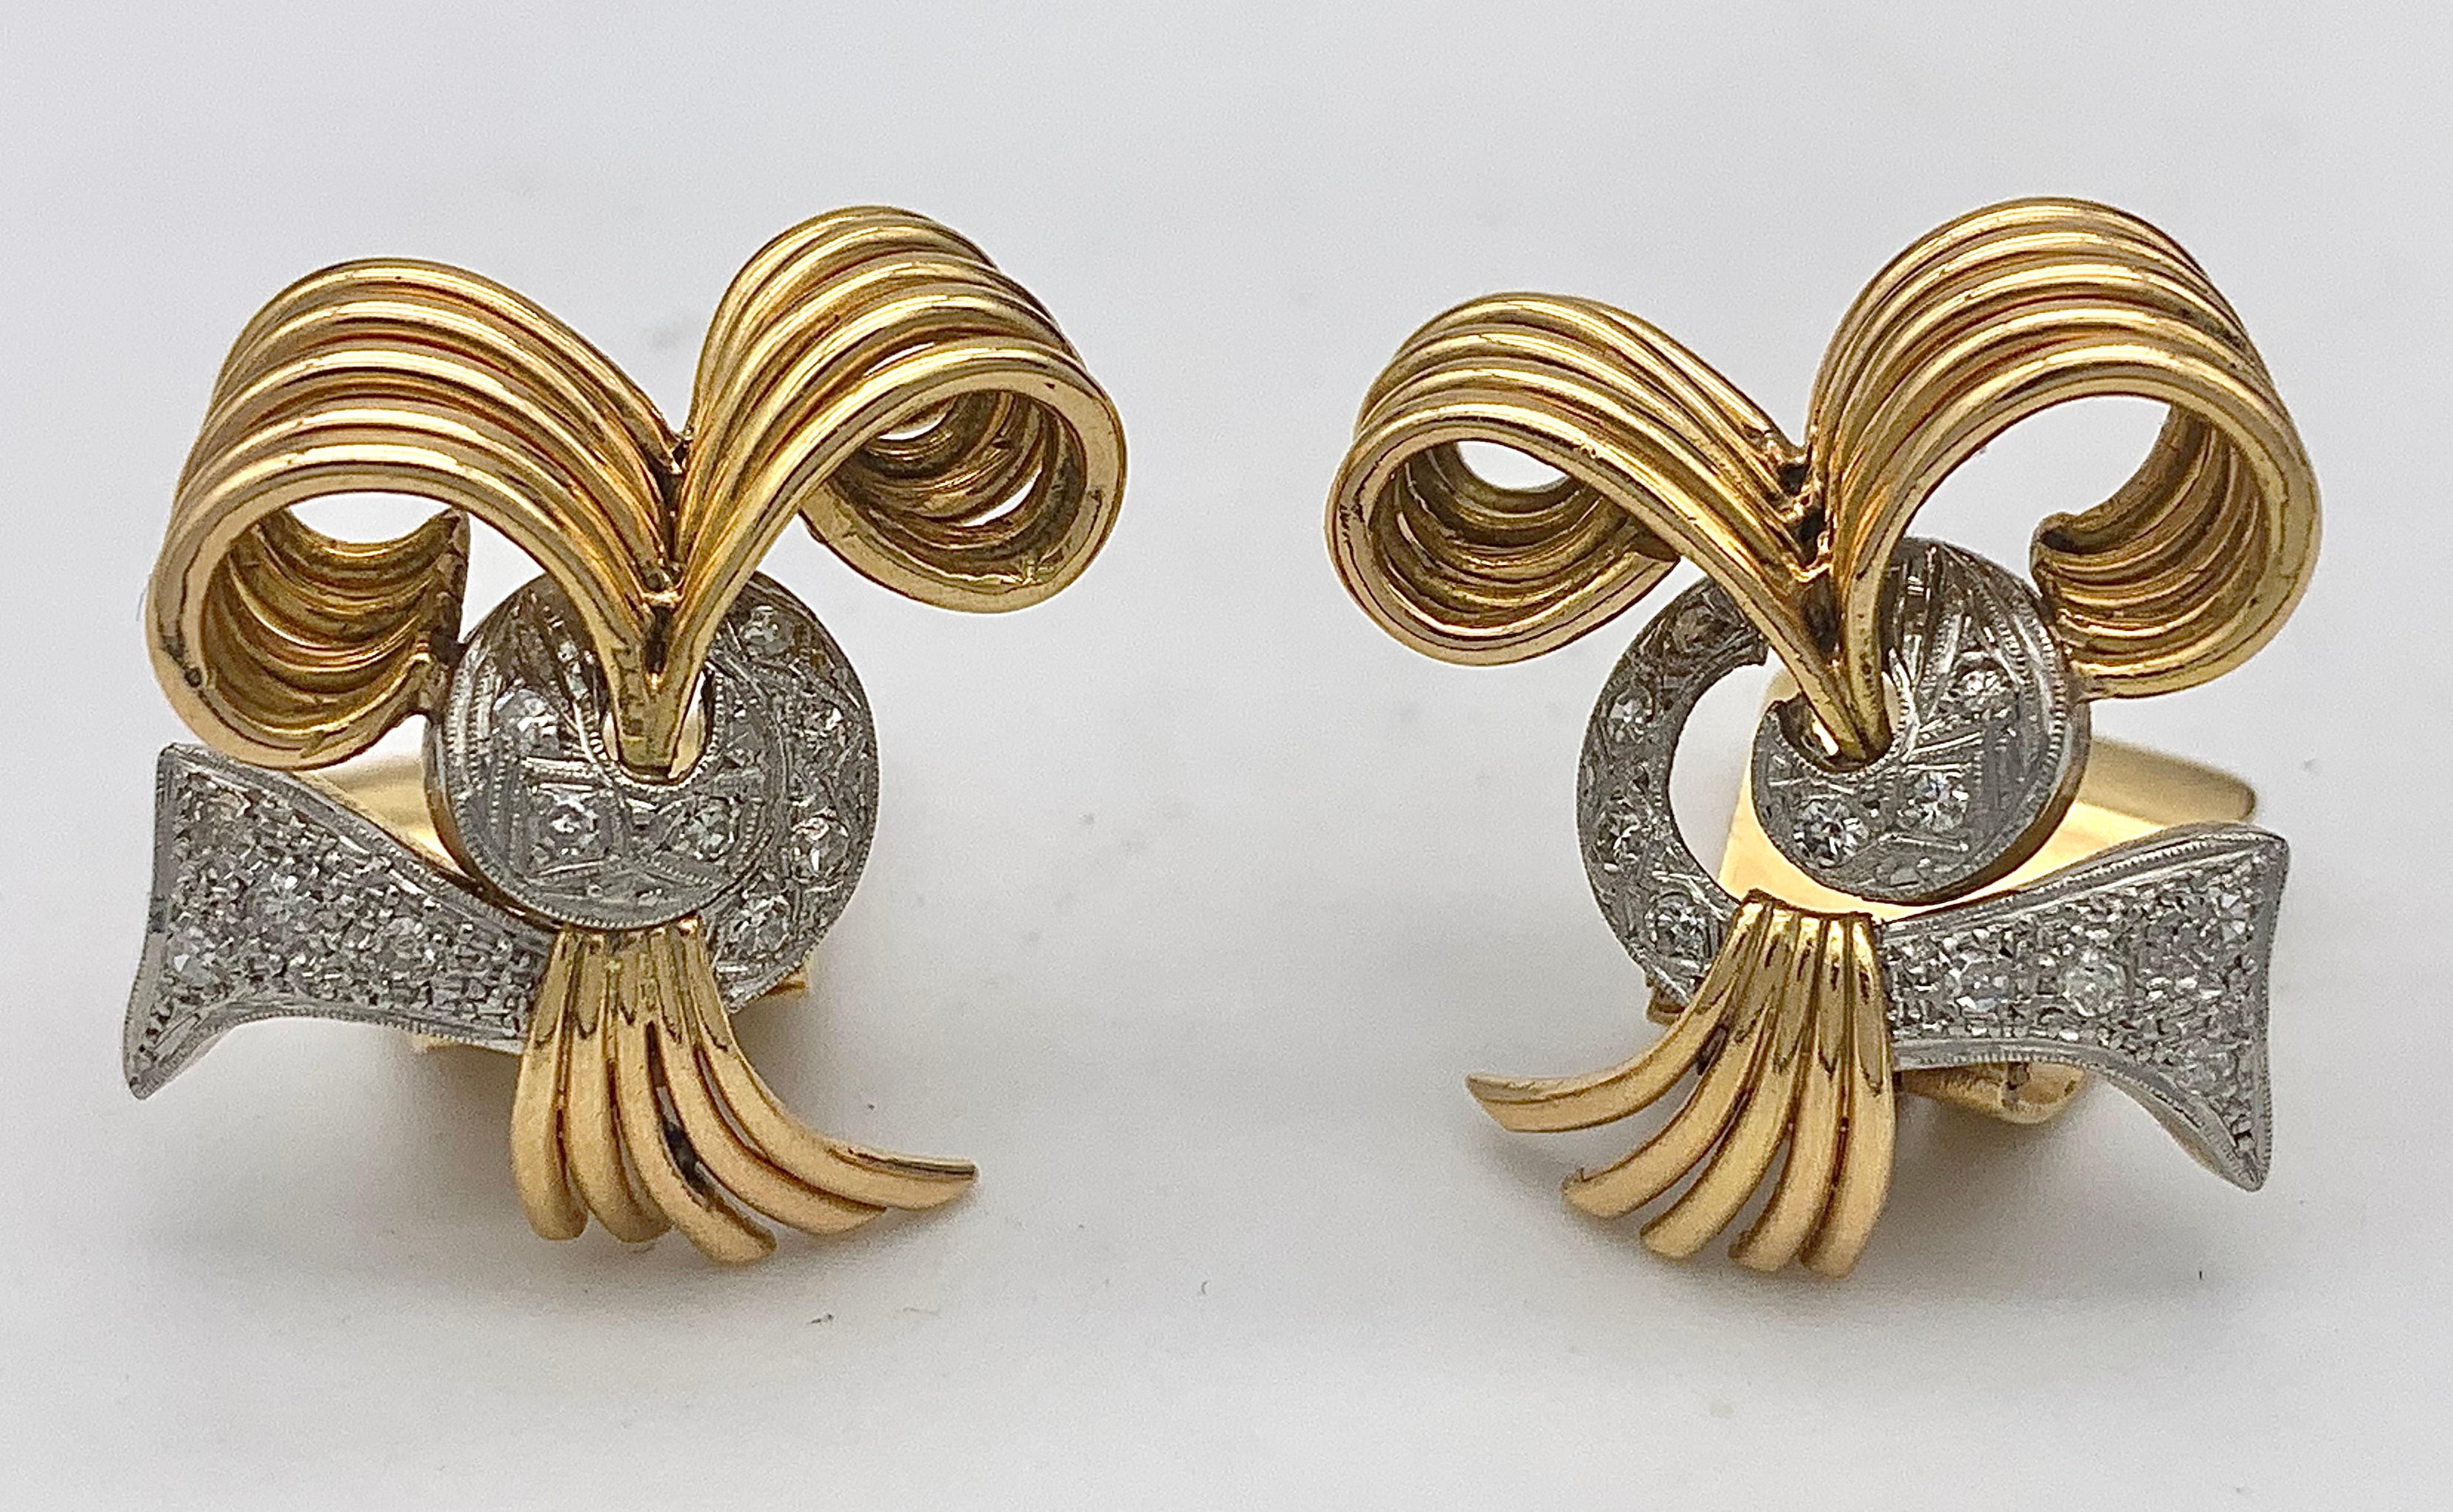 These Art Deco clip-on earrings were made out of 14 karat yellow gold and platinum in the early 1930's. The dynamic design is full of movement. Thick gold wire bundles that curl in all directions are threaded through platinum elements that resemble